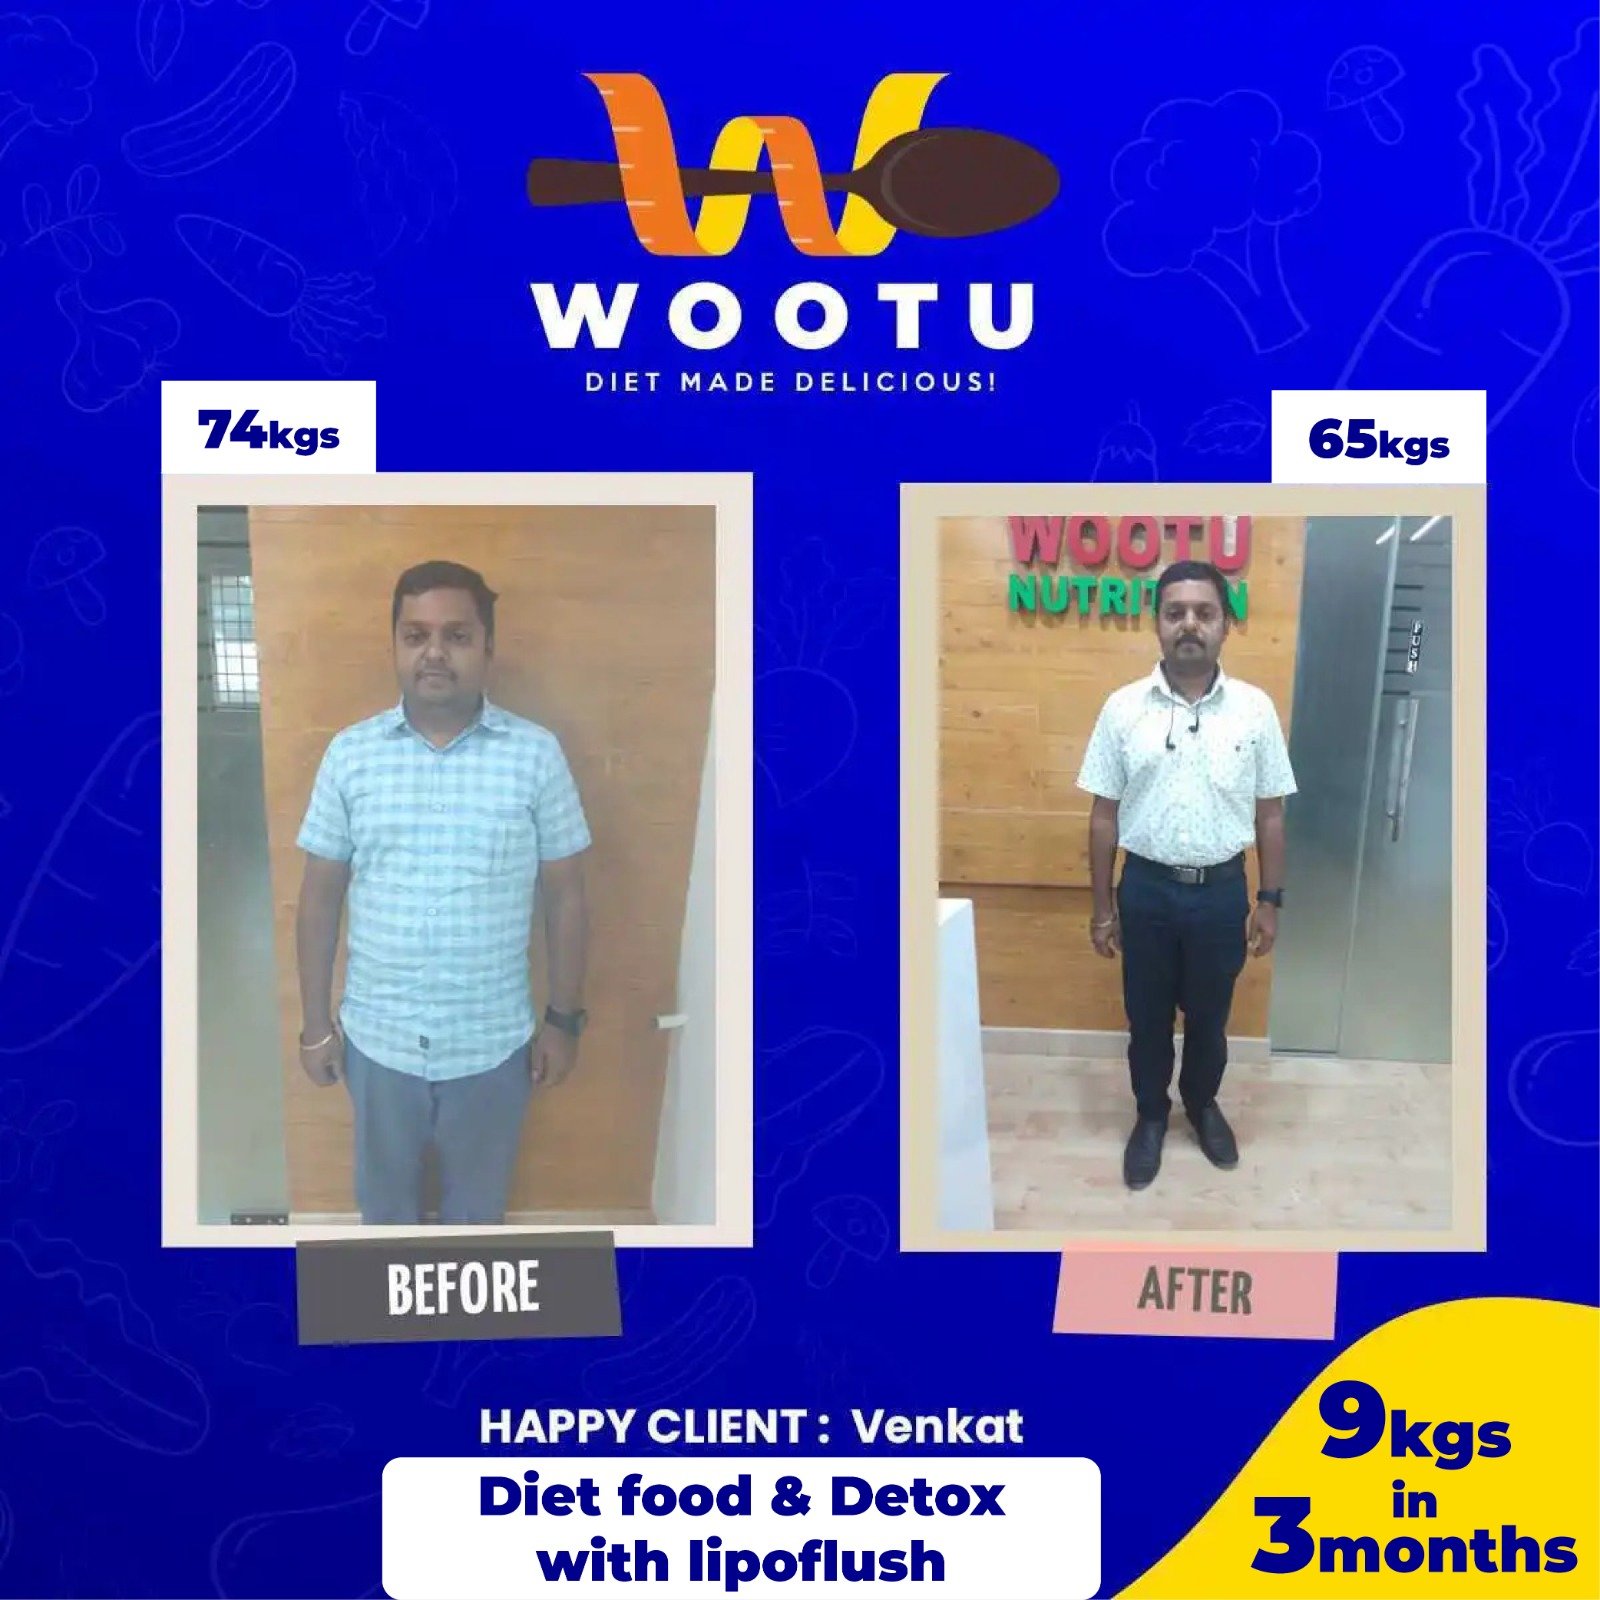 Venkat's before and afters, a happy client who lost weight with the use of food and therapy at Wootu Nutrition in Chennai.